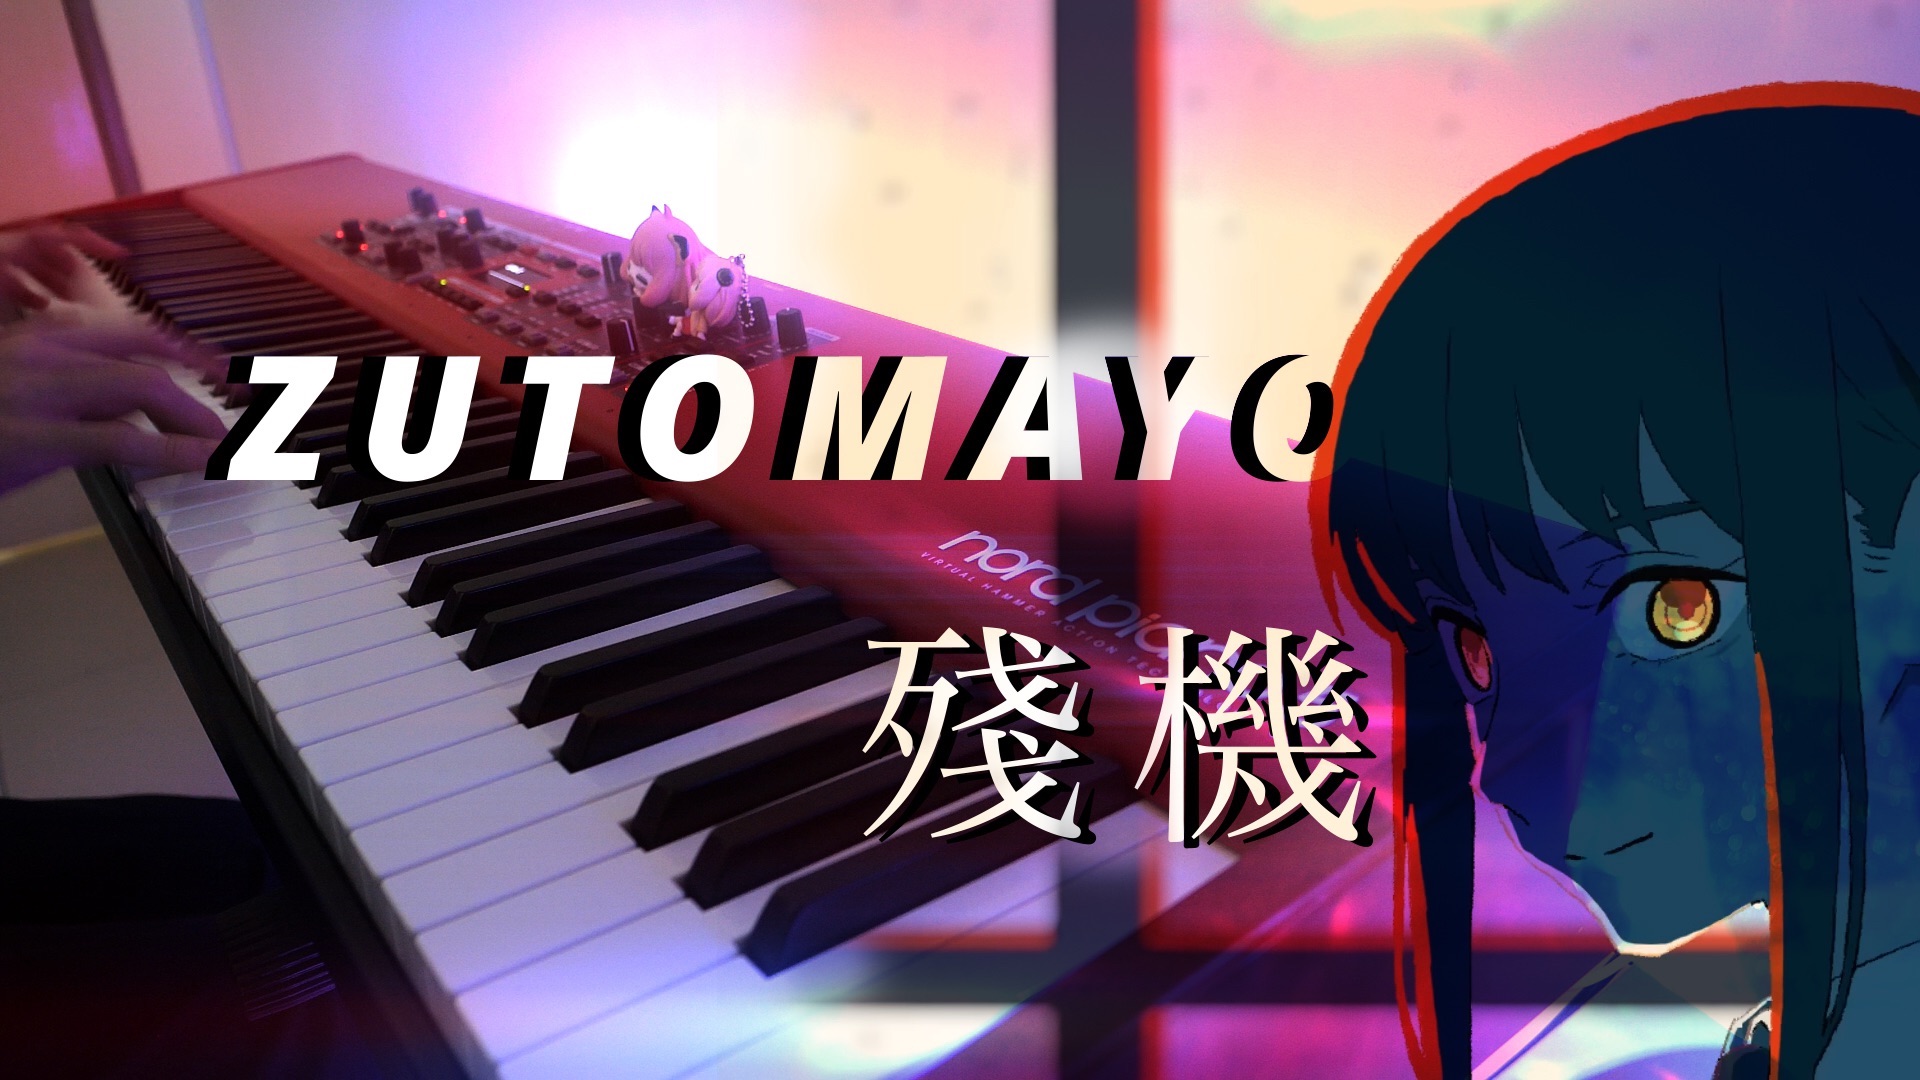 Anime Music Sheets  Online Keyboard at Virtual Piano  Learn  Play